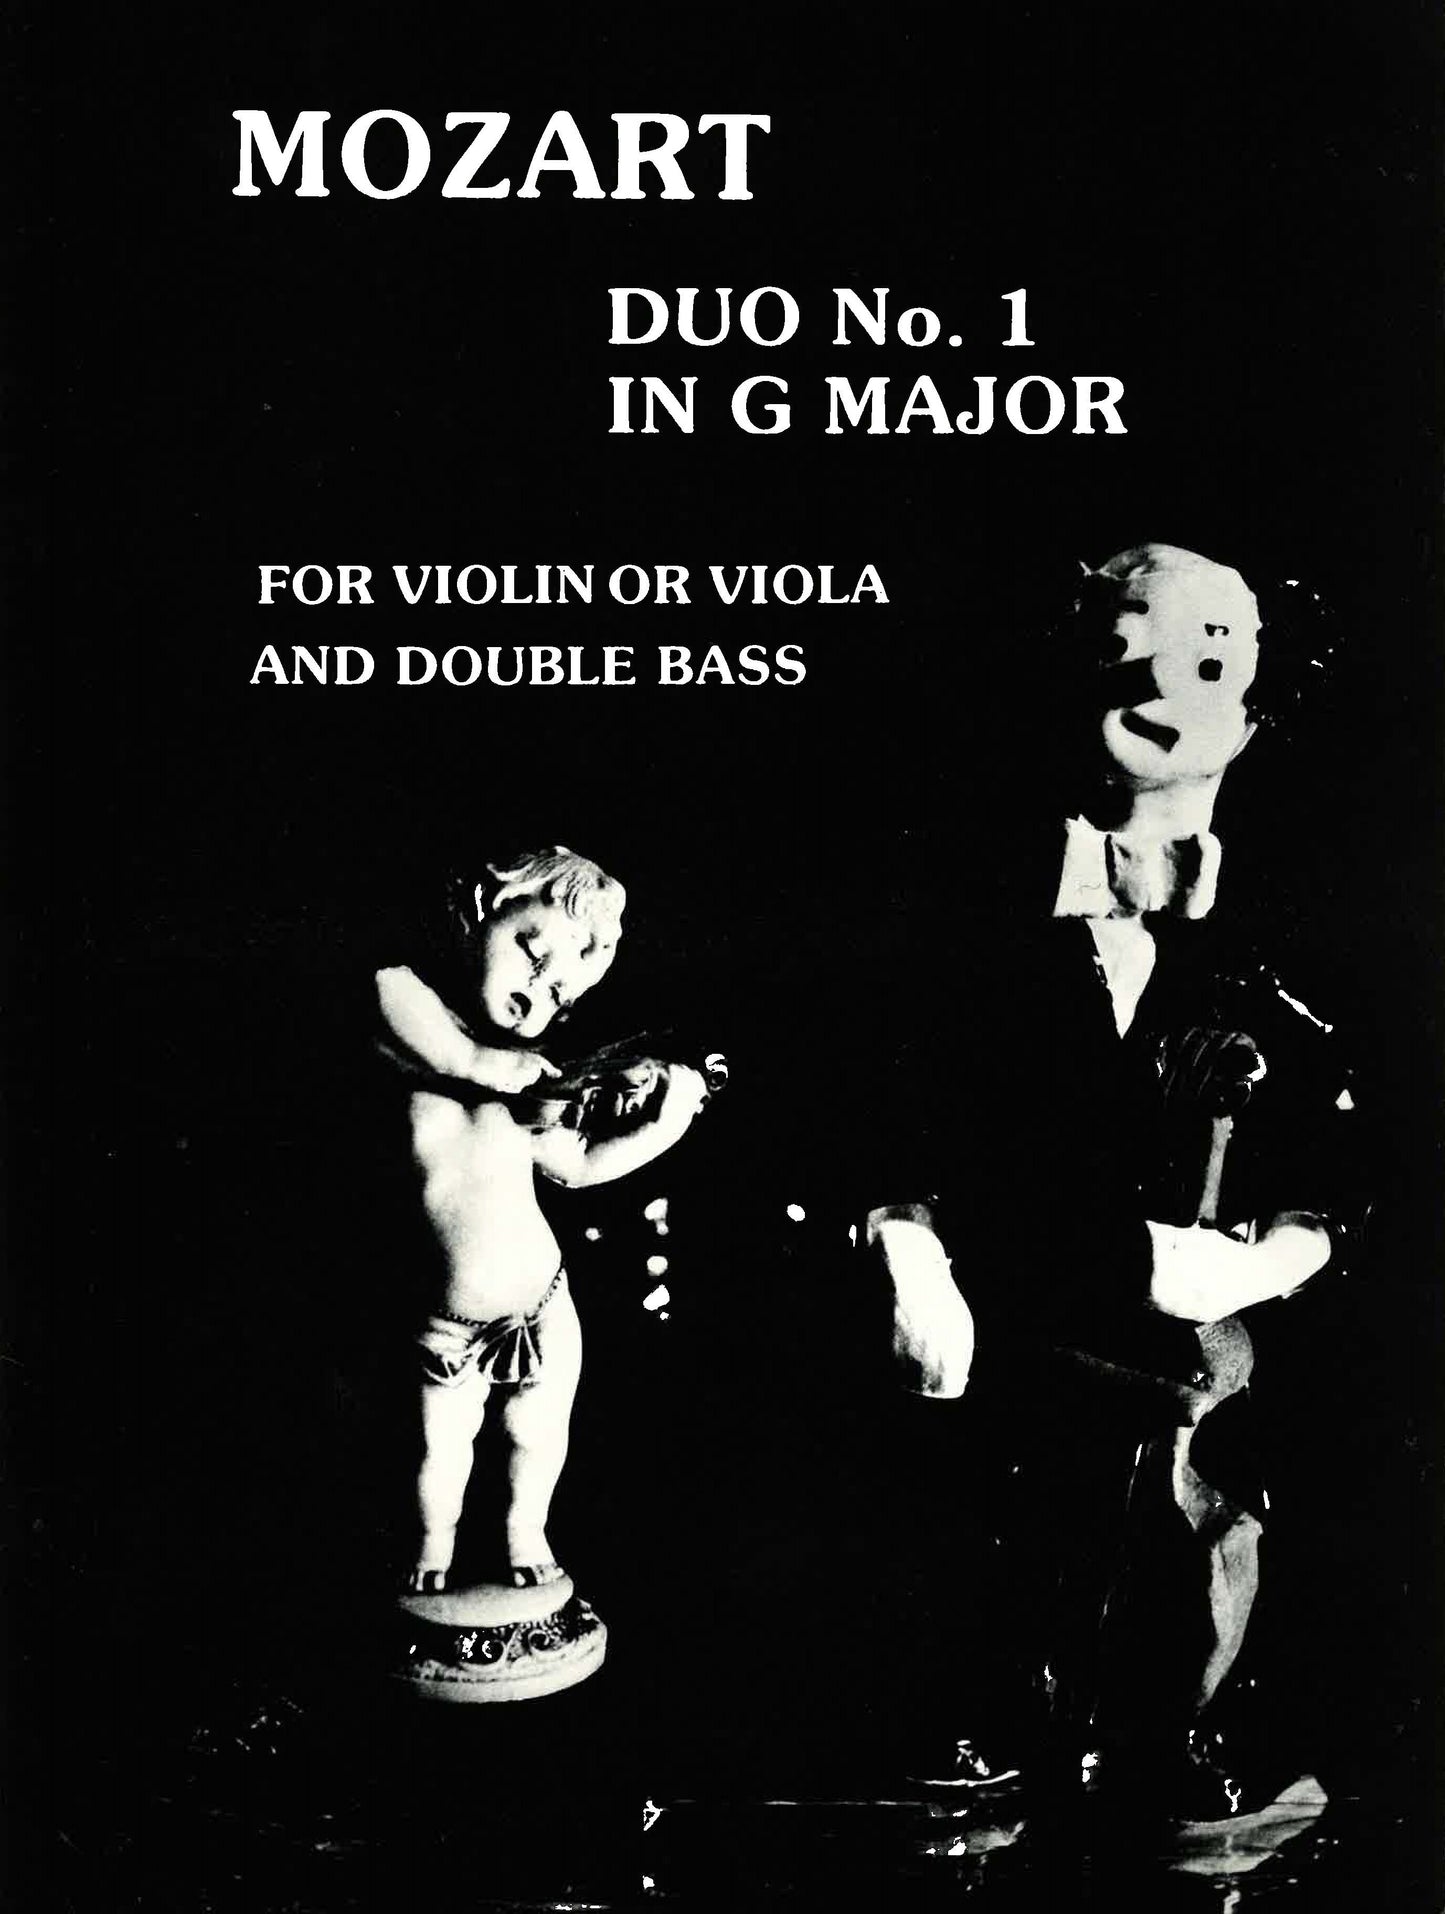 Mozart: Duo No. 1 in G Major for Violin or Viola and Double Bass